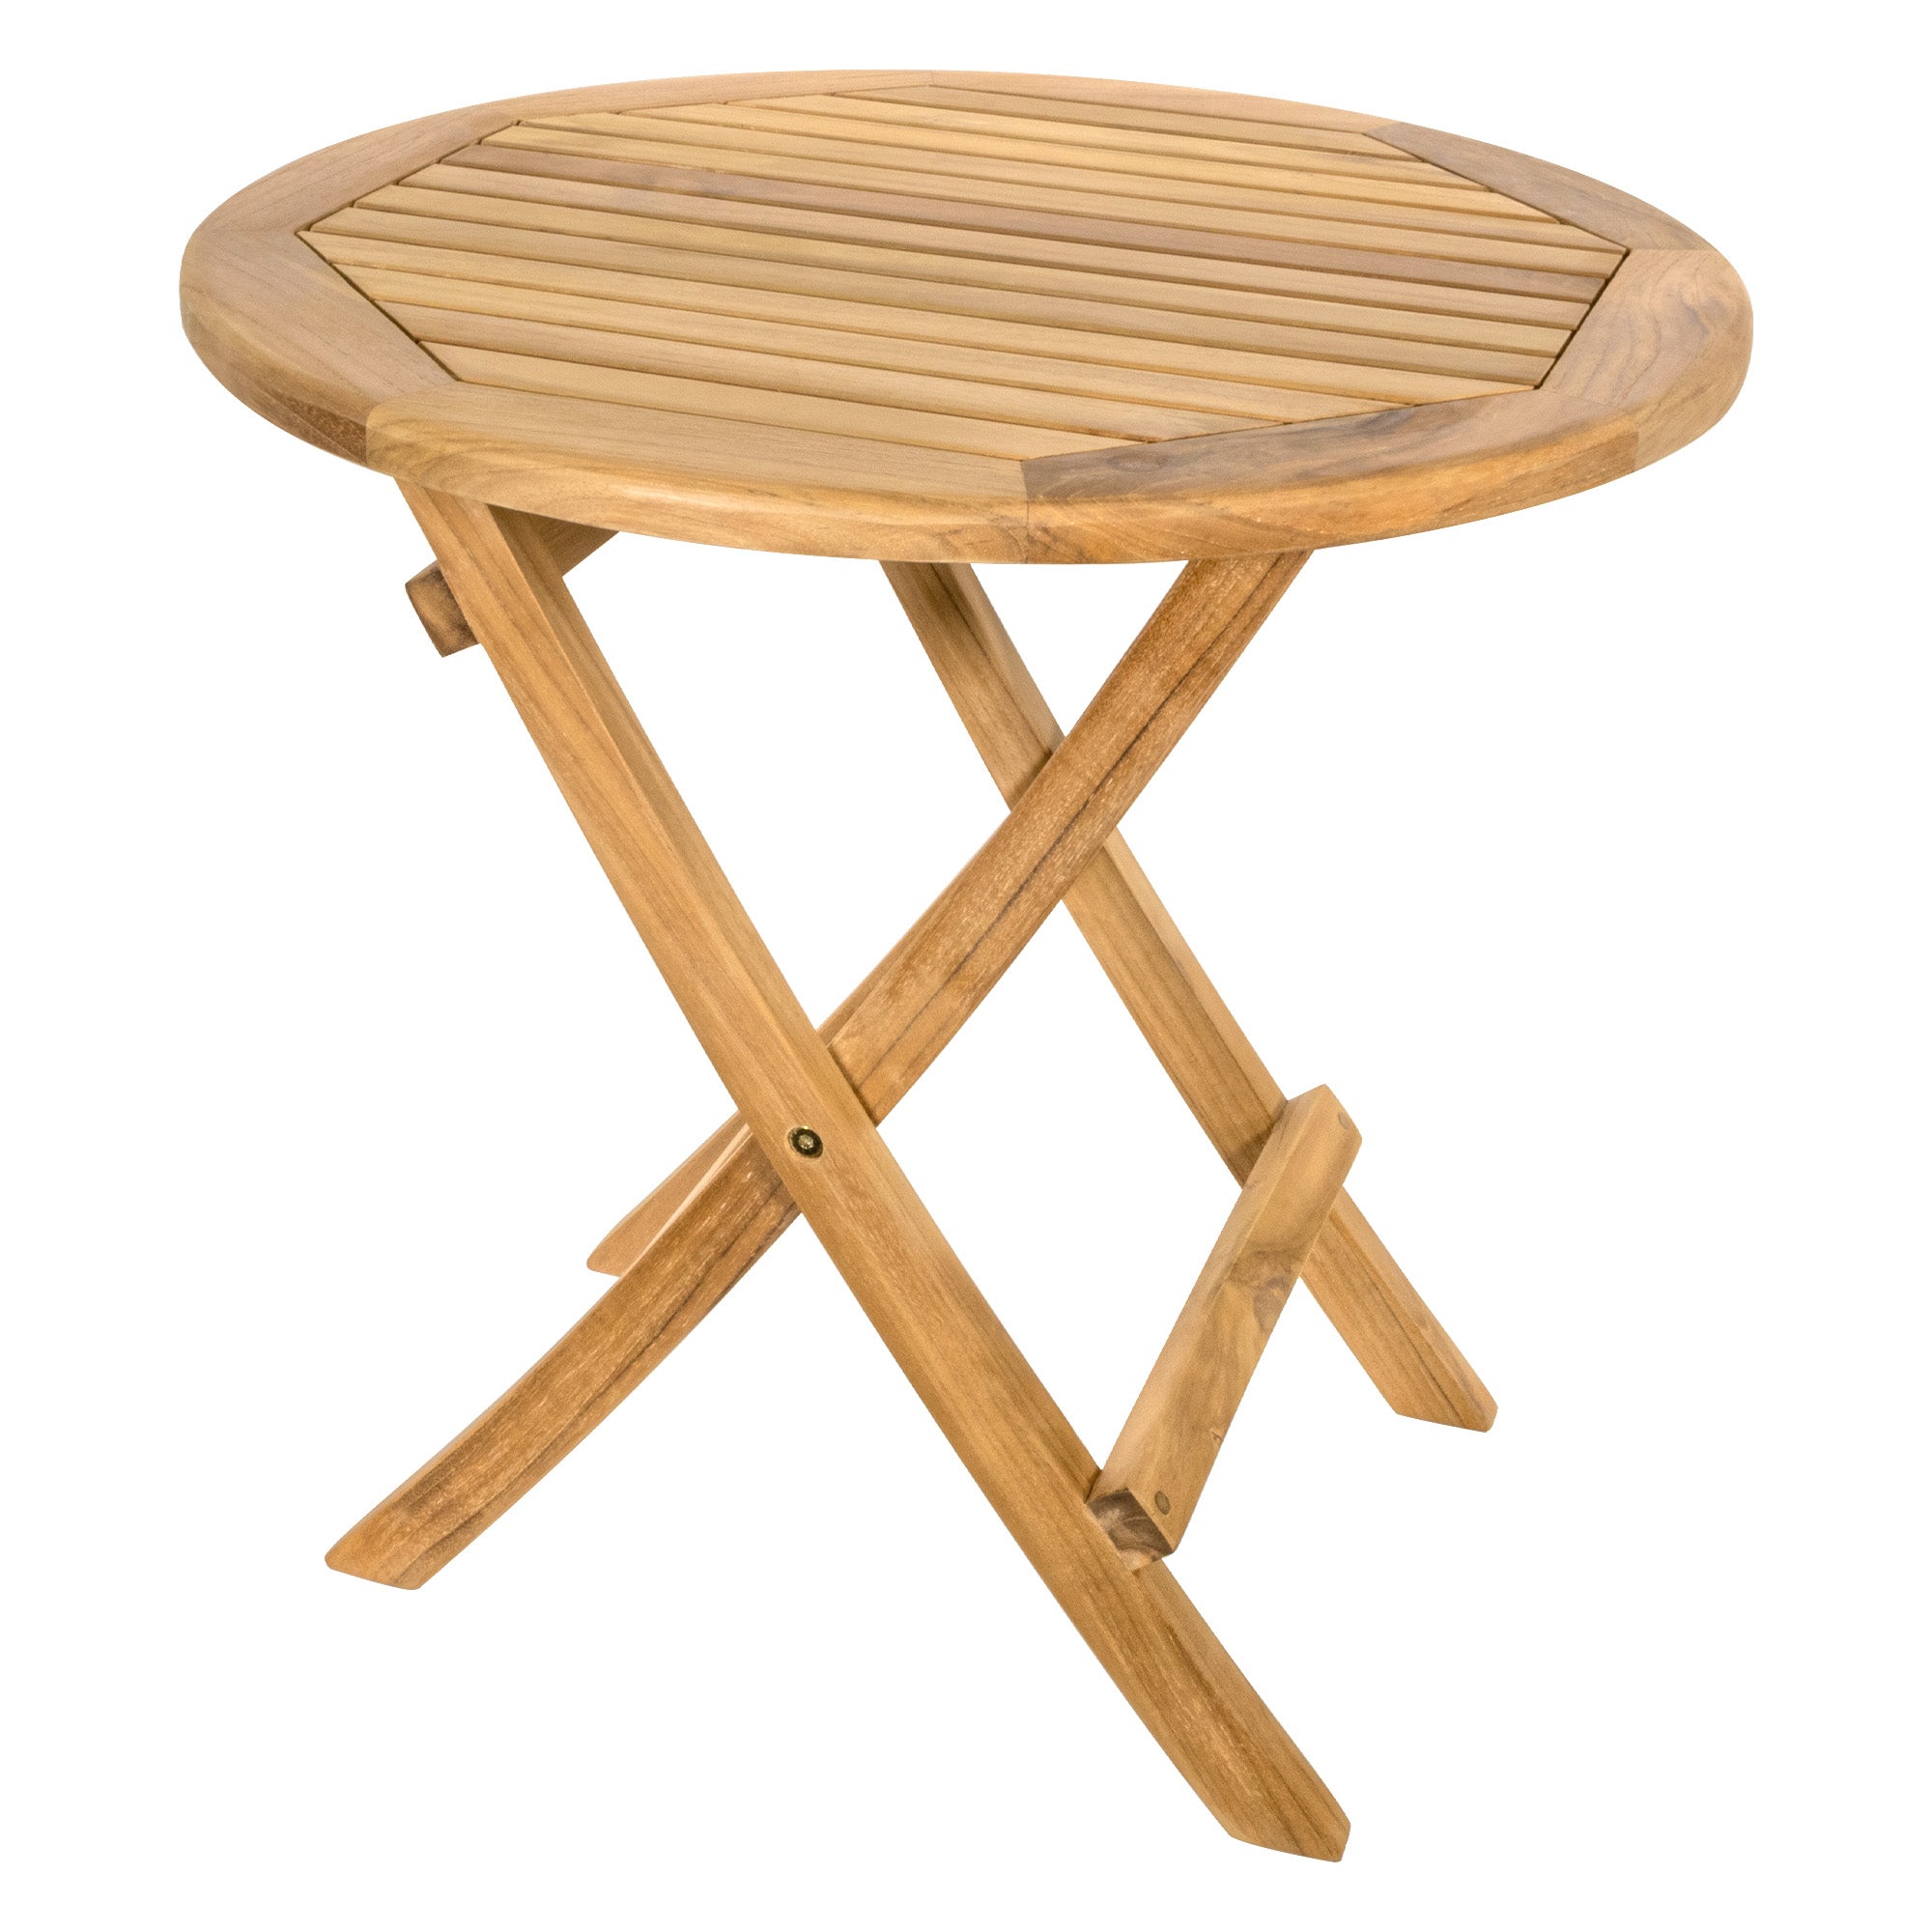 Ruger Natural Round Folding Side Table - 20"